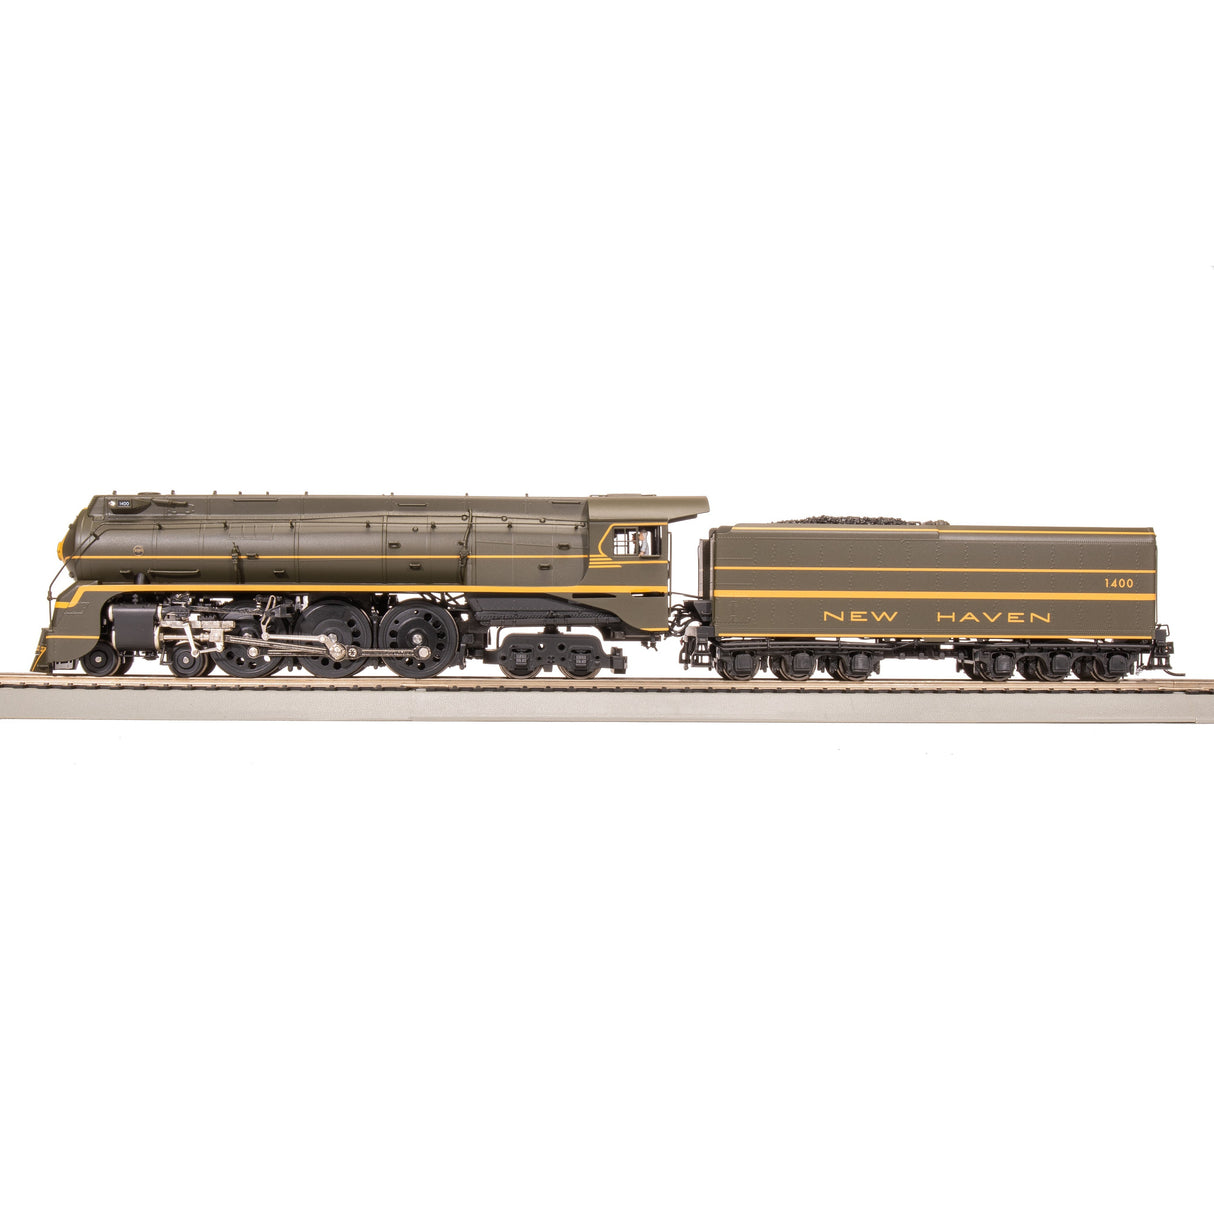 Broadway Limited HO Scale HY NH I-5 4-6-4 Steam Locomotive #1400/Green Fantasy DCC Ready